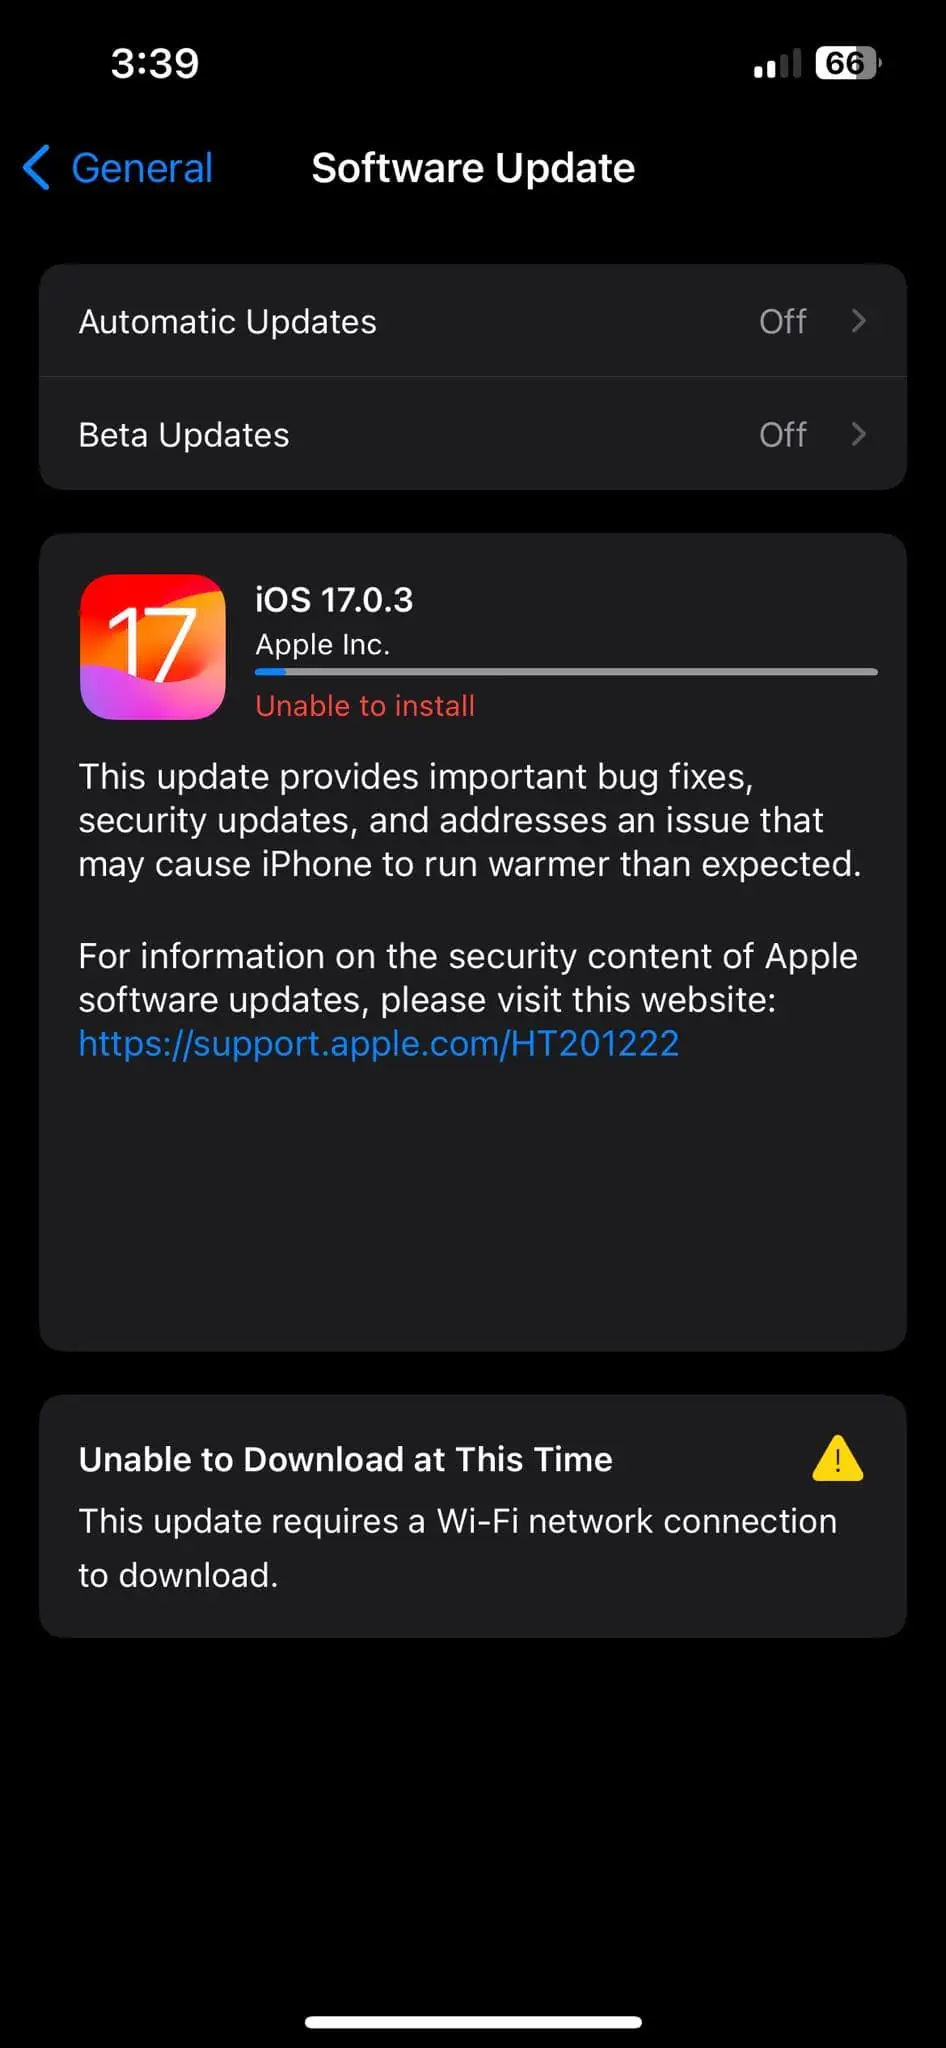 iphone software update unable to download at this time